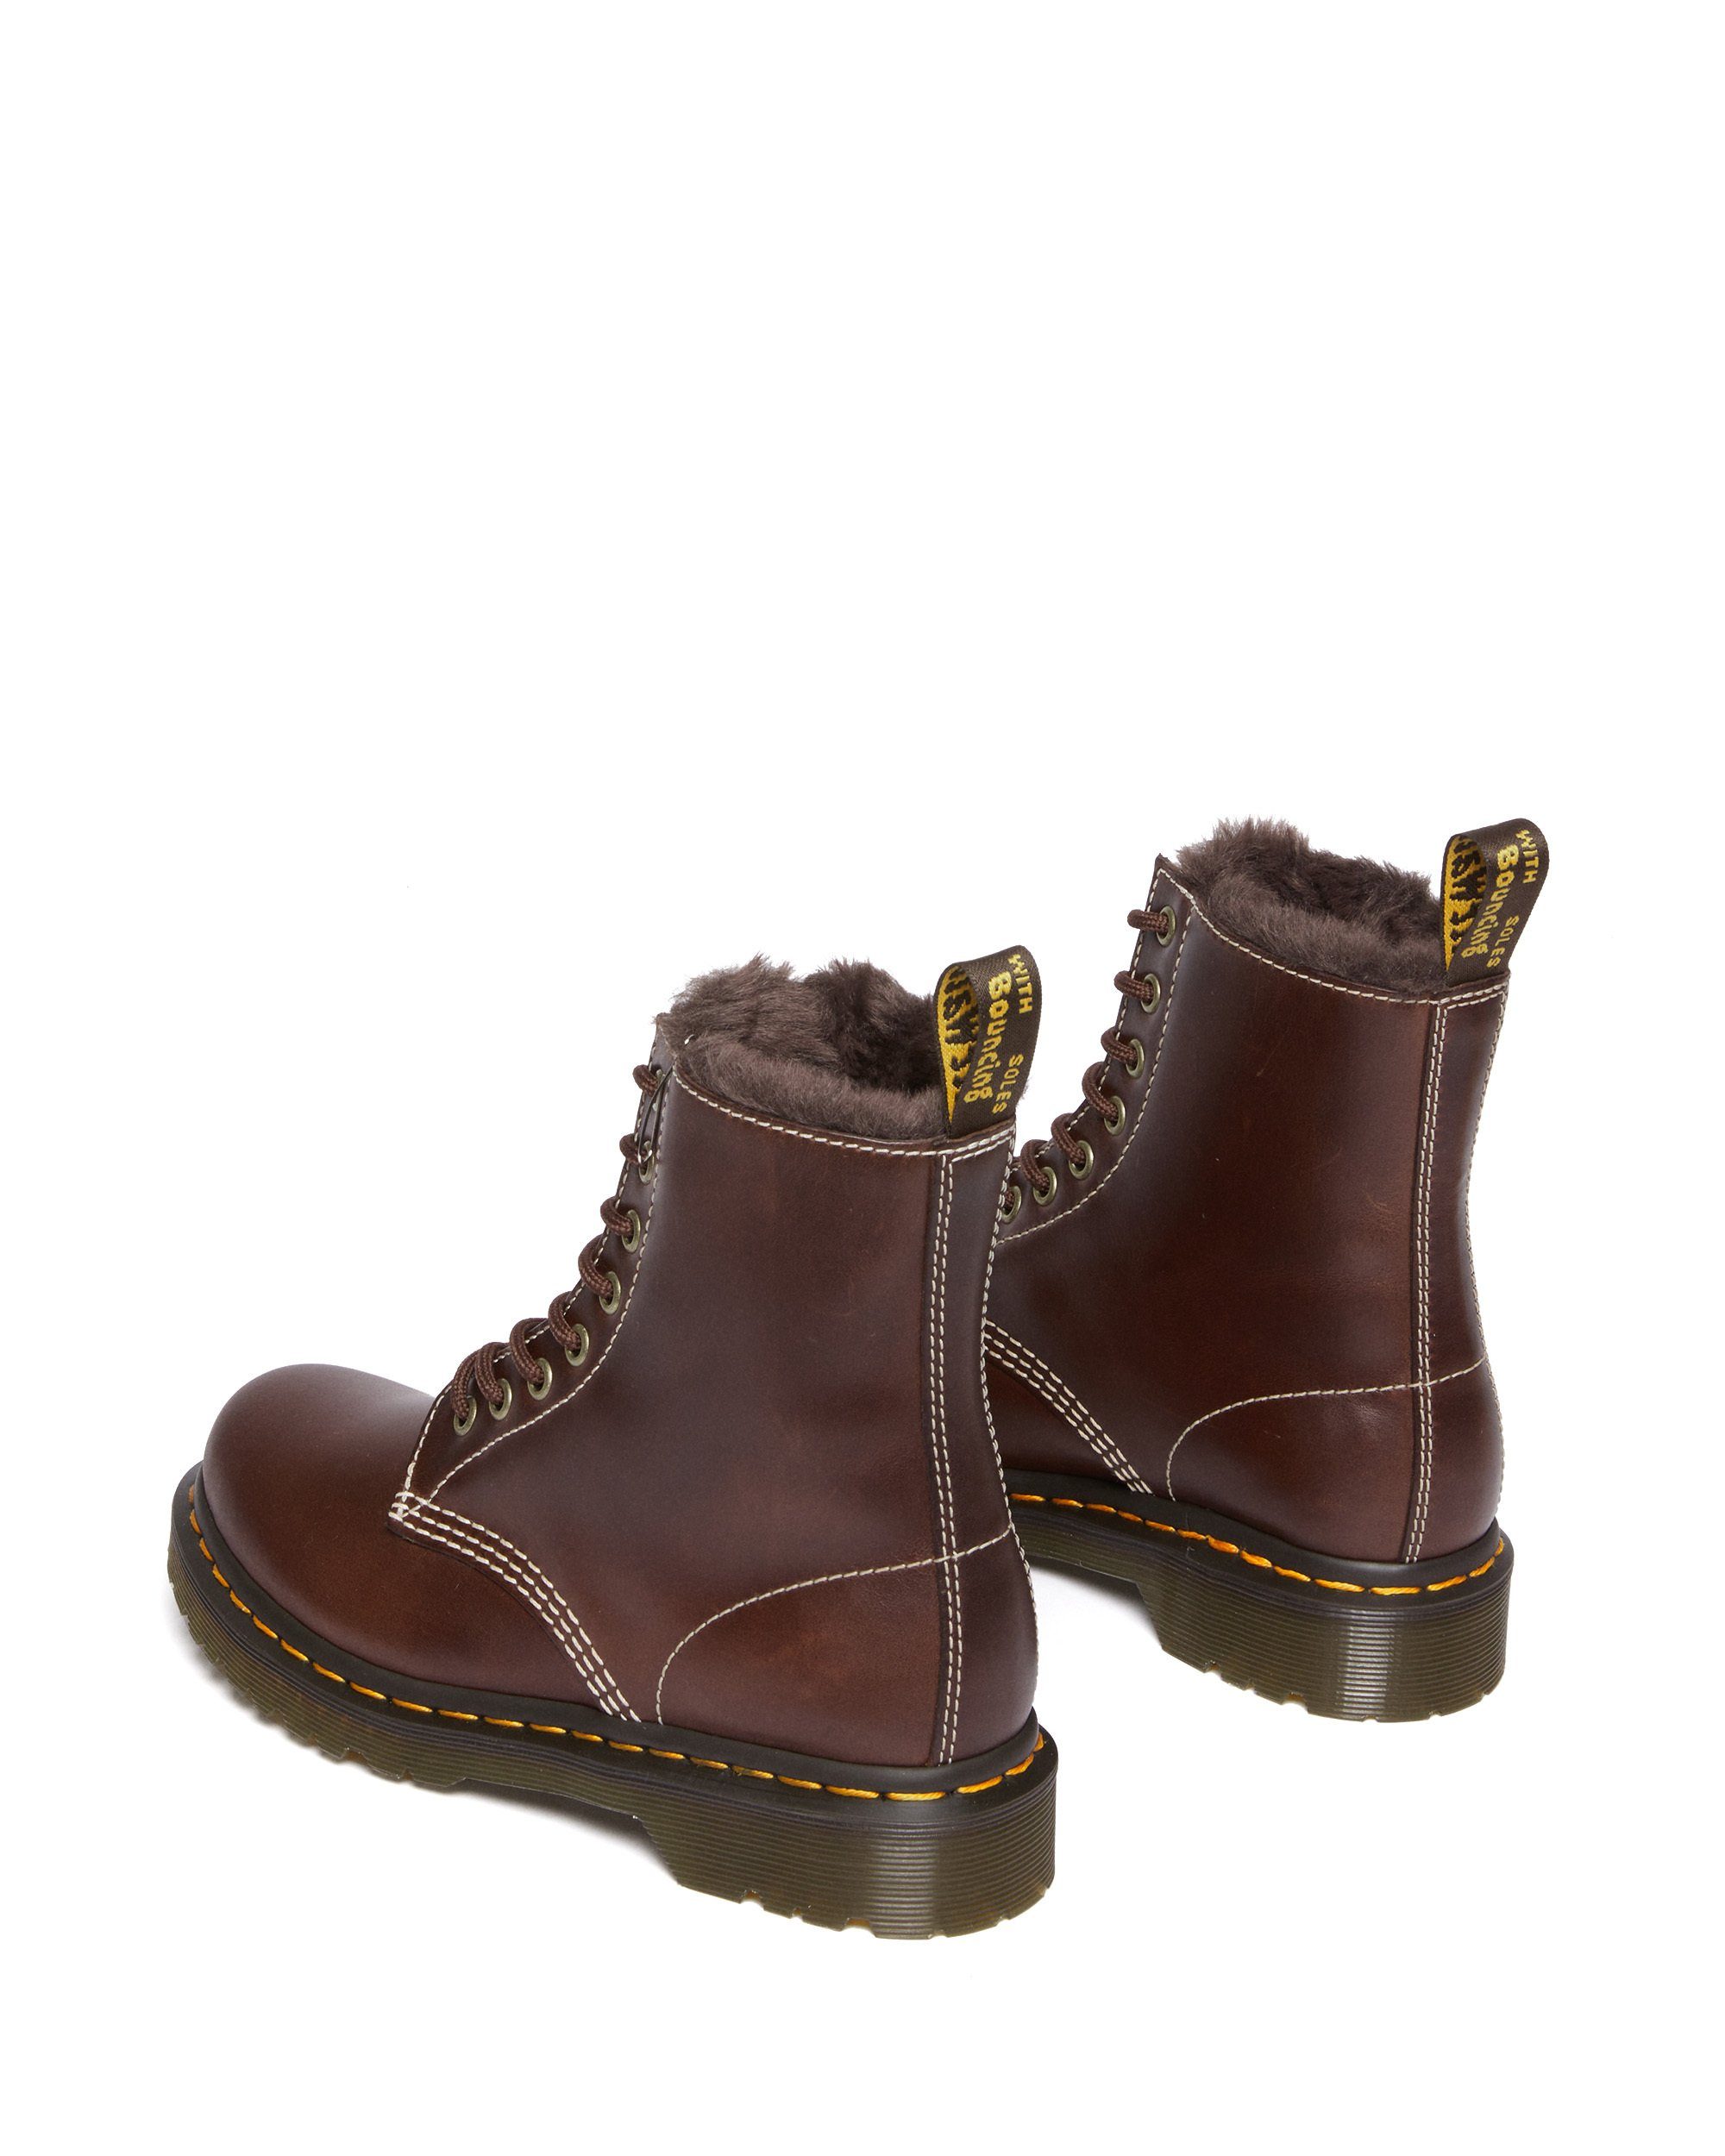 Ankleboots MARTENS SERENA 1460 (2-tlg) up Dunkelbraun DR. pull classic